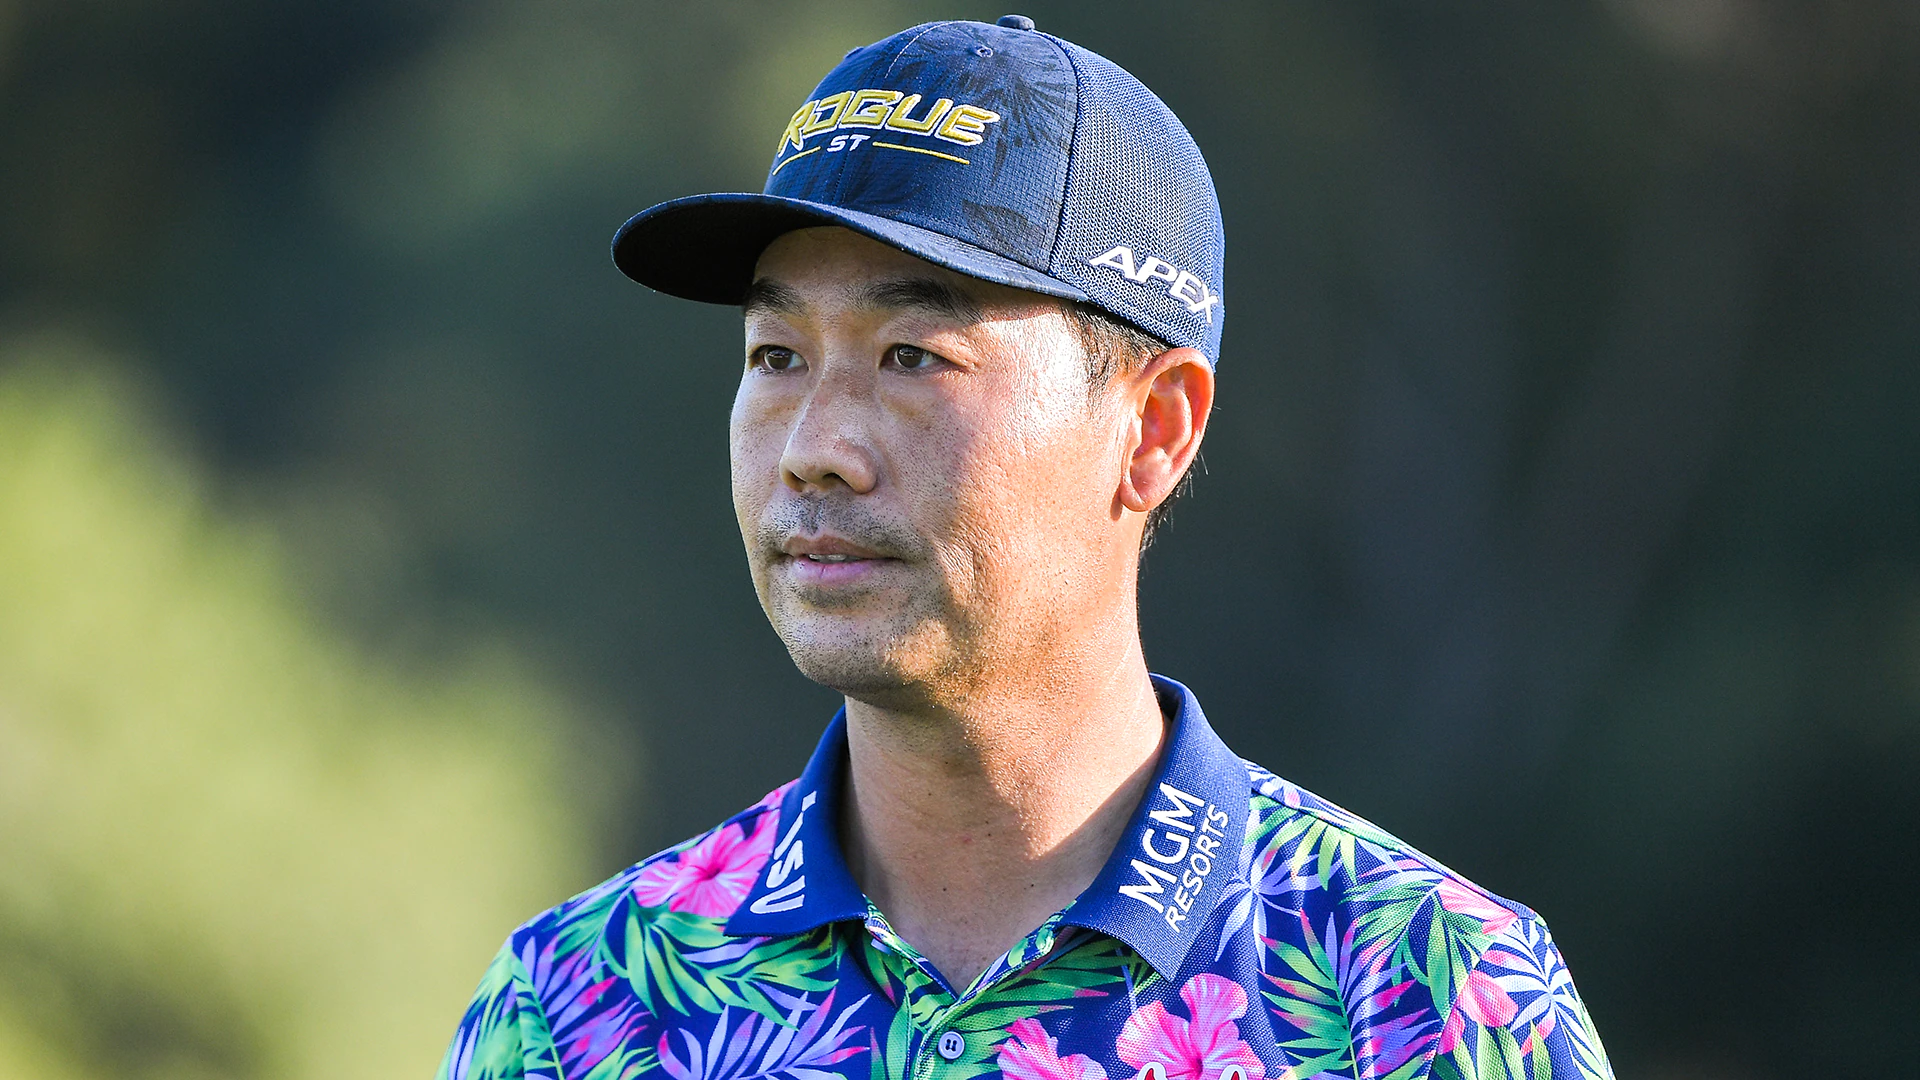 Kevin Na: Brooks Koepka, other pros liked my Grayson Murray tweet